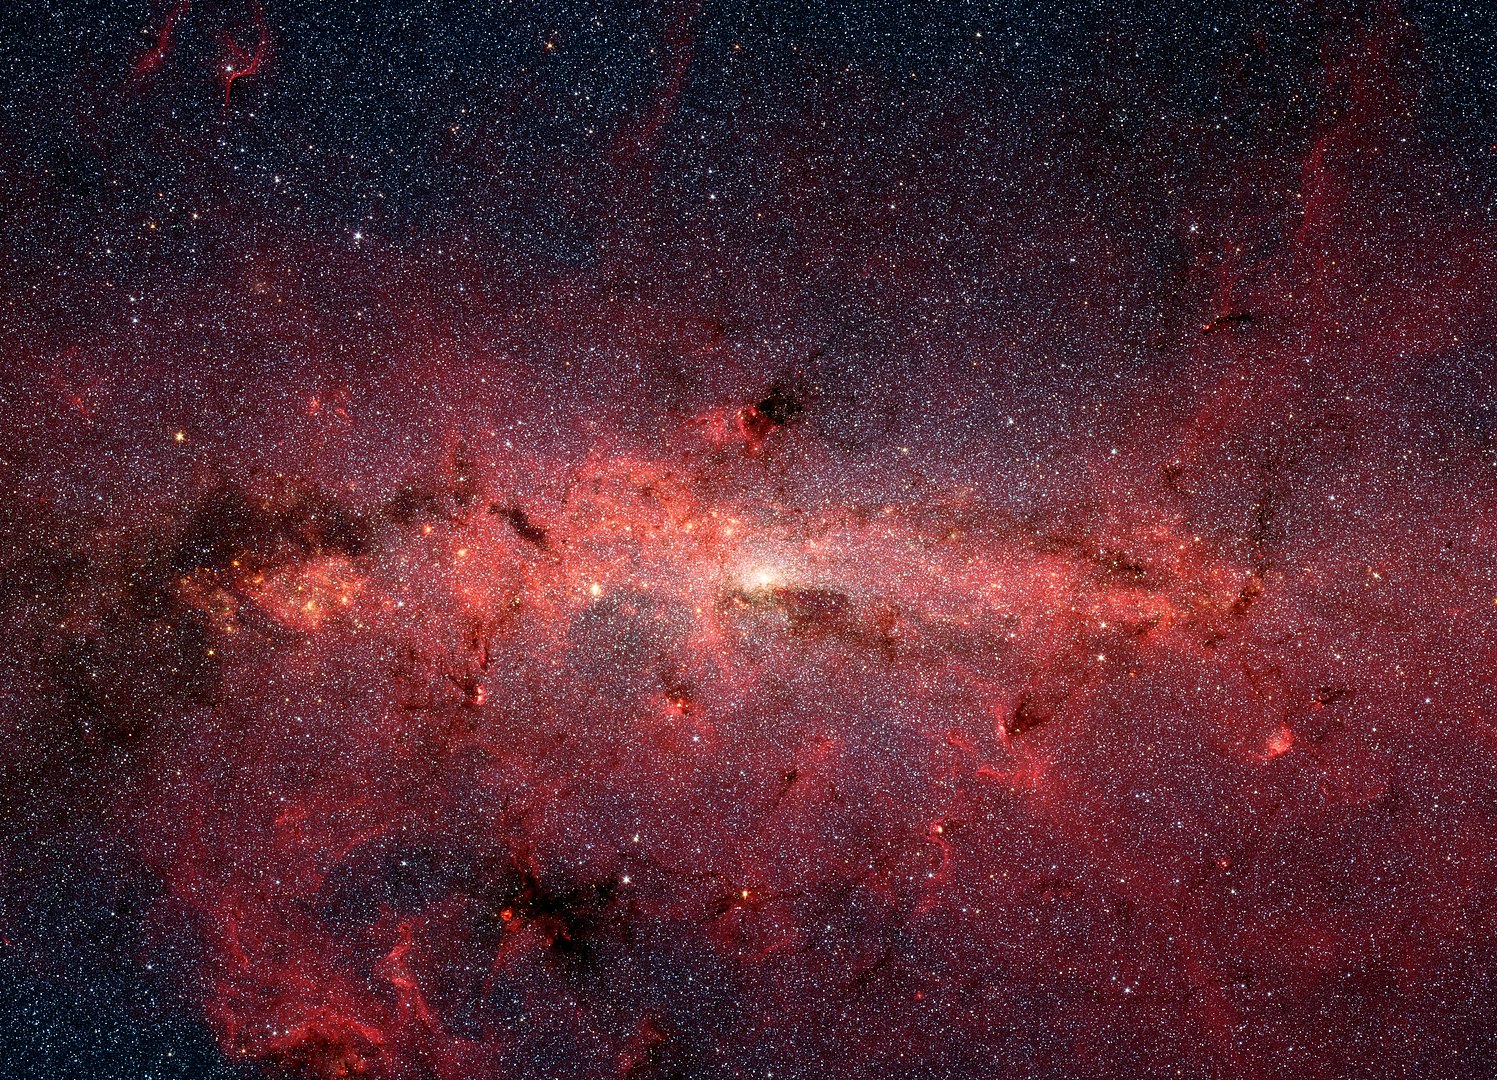 Infrared image from NASA's Spitzer Space Telescope showing hundreds of thousands of stars in the Milky Way galaxy